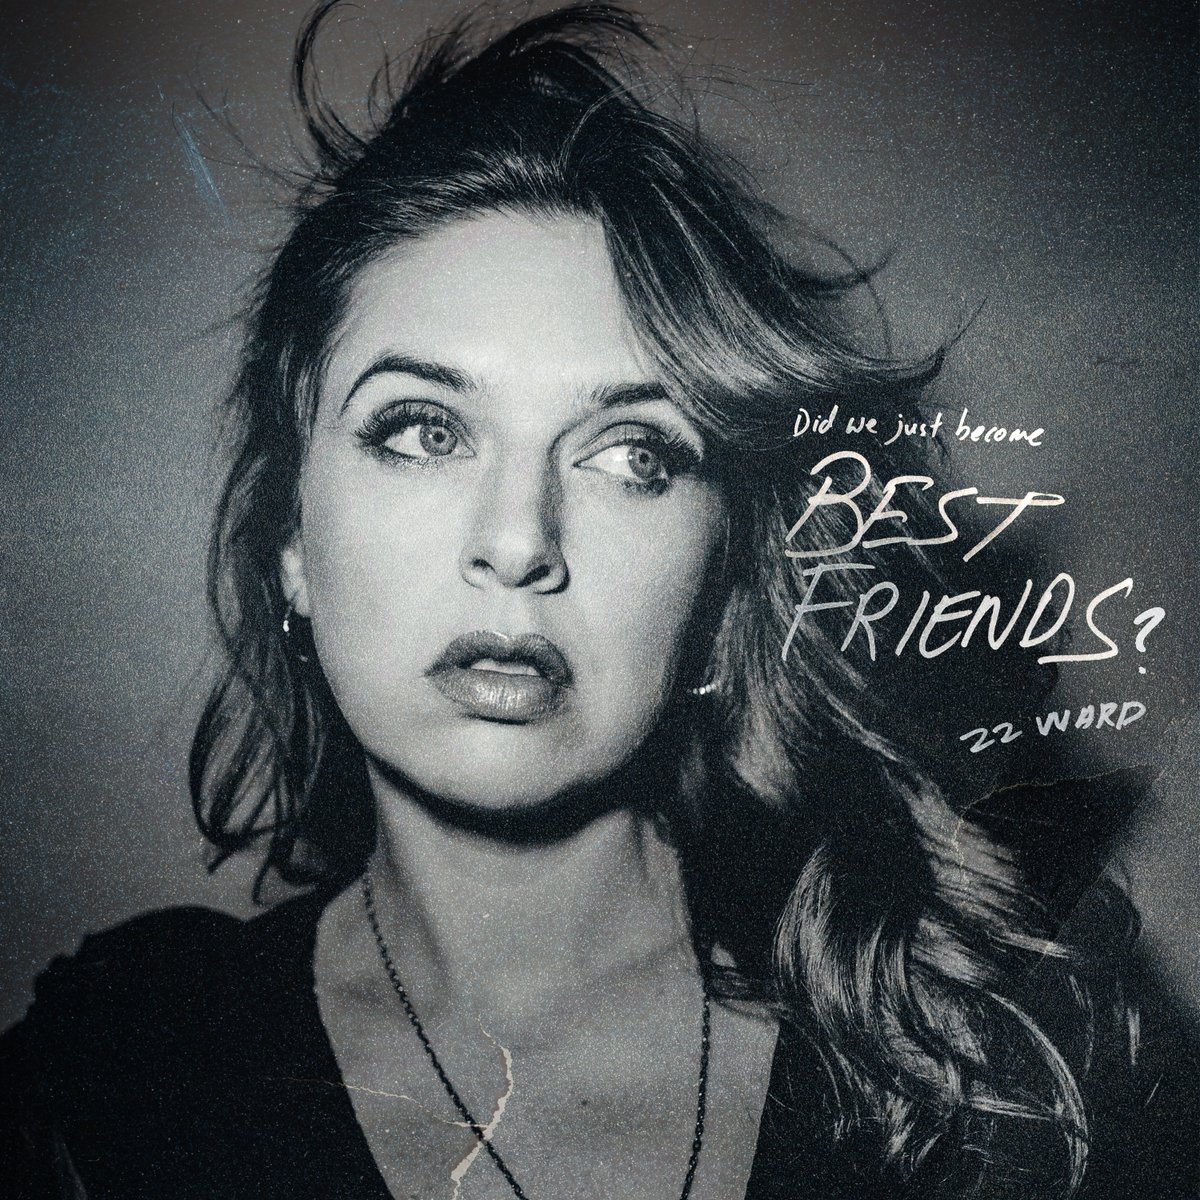 Fam!! I am soooo excited to tell you my new song “Best Friends” comes out this Friday 3/8 🤍 Can’t wait for you to hear this one! Pre-save here- stem.ffm.to/bestfriends